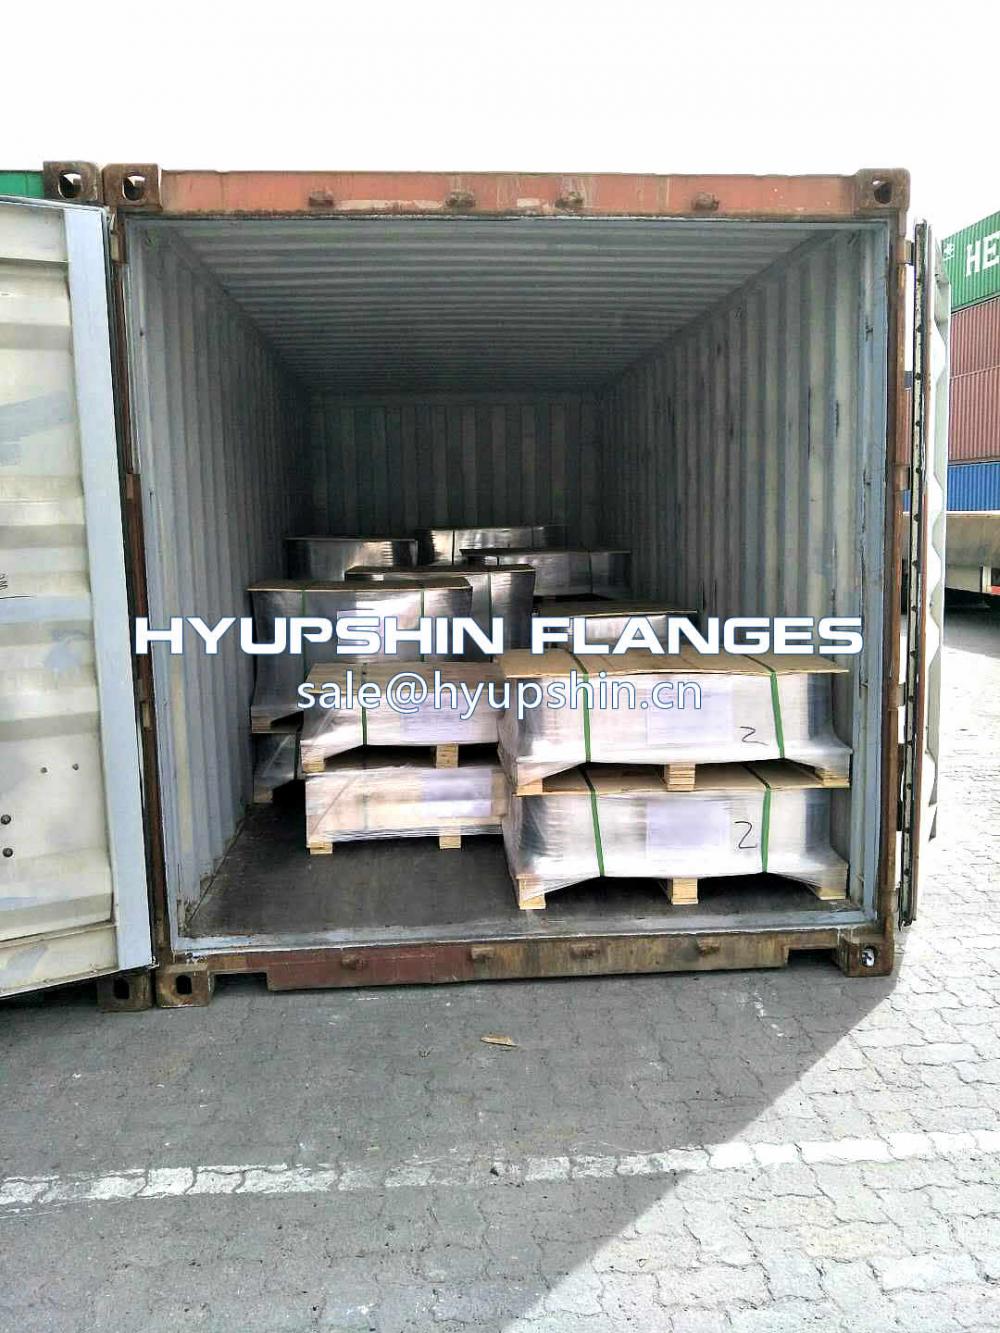 Hyupshin Flanges Export to Romania by Containers